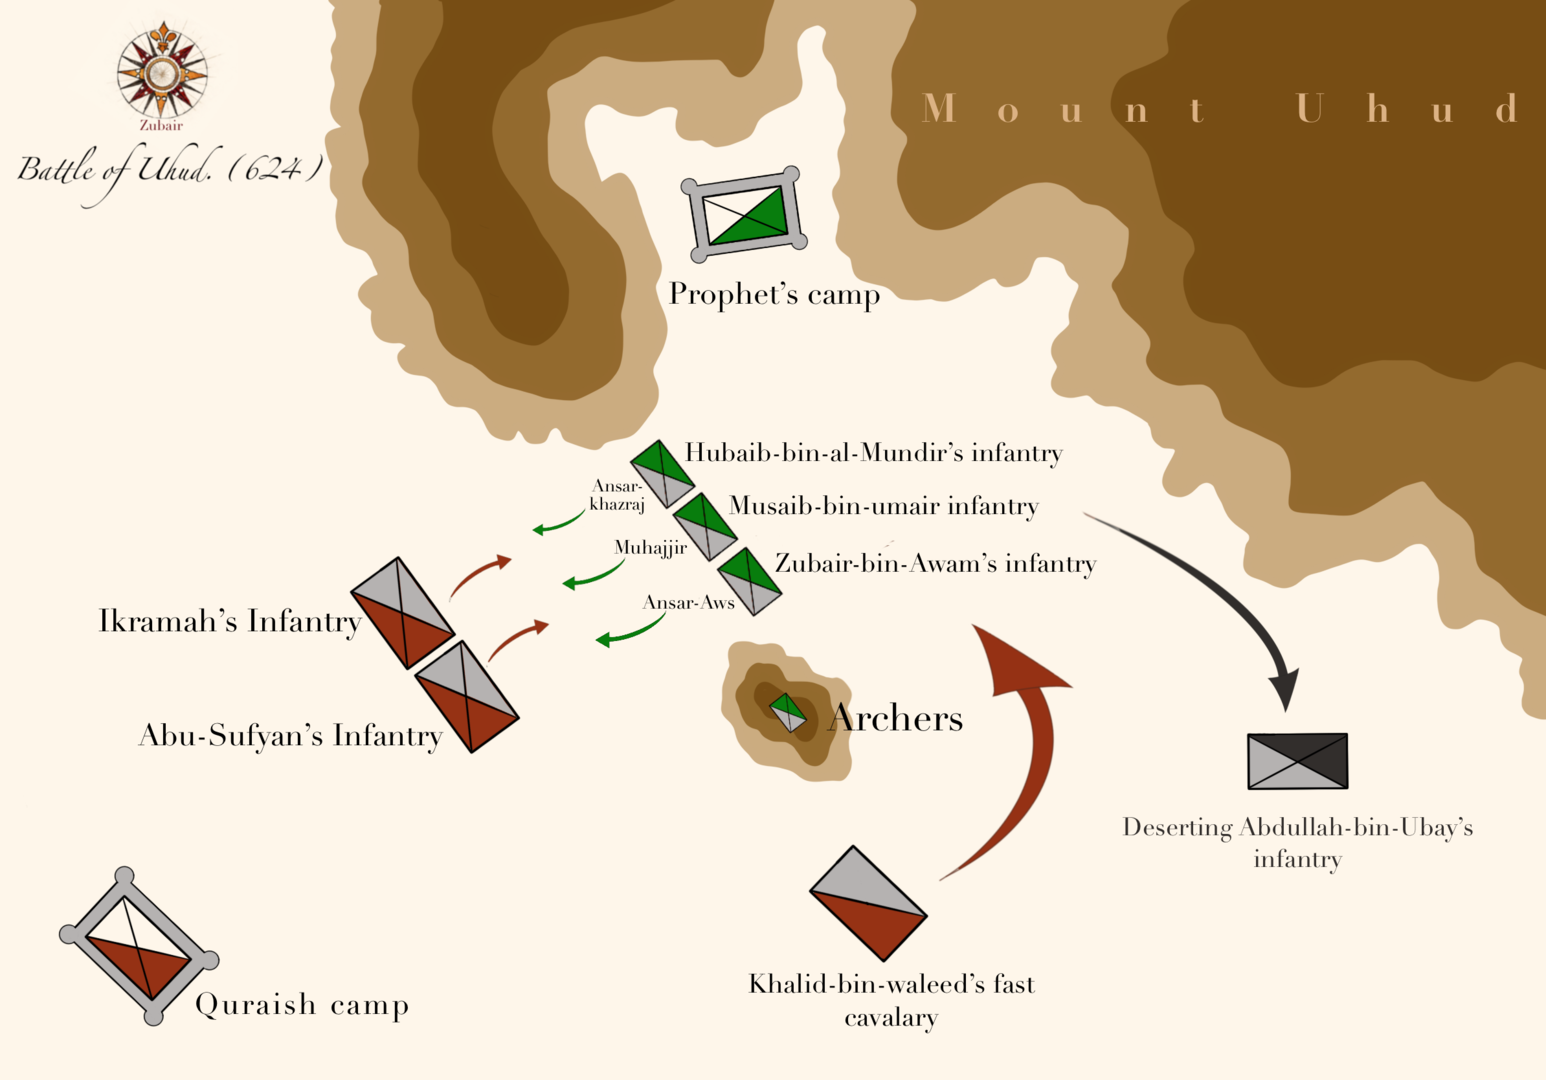 Formations of the Battle of Uhud